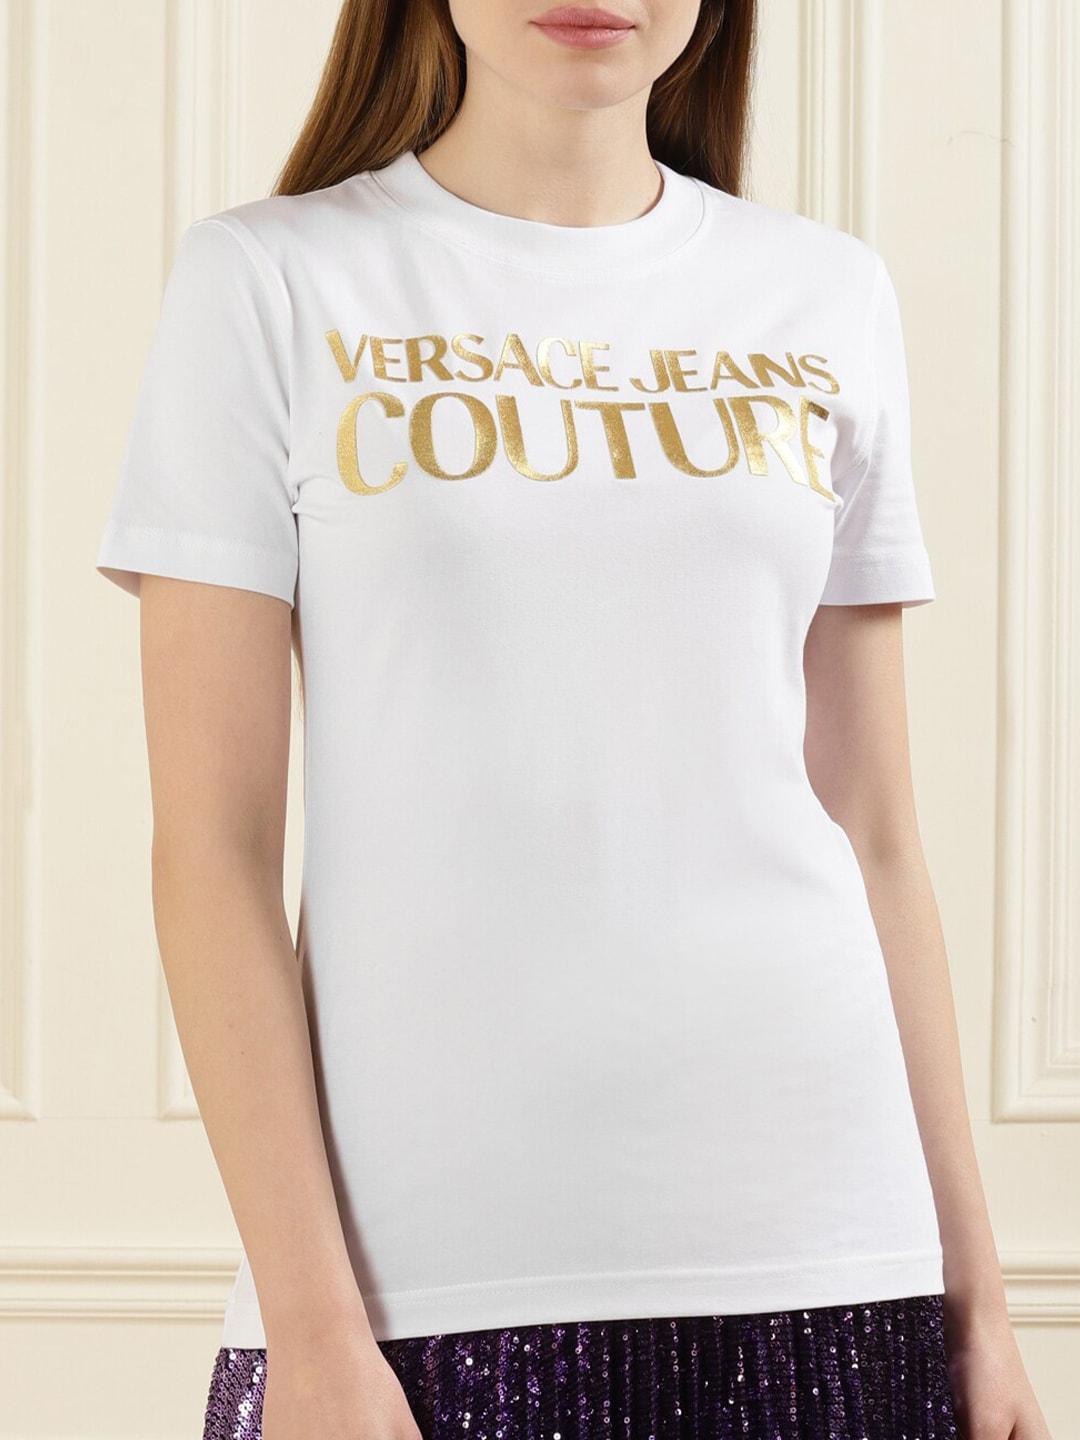 versace jeans couture white print top